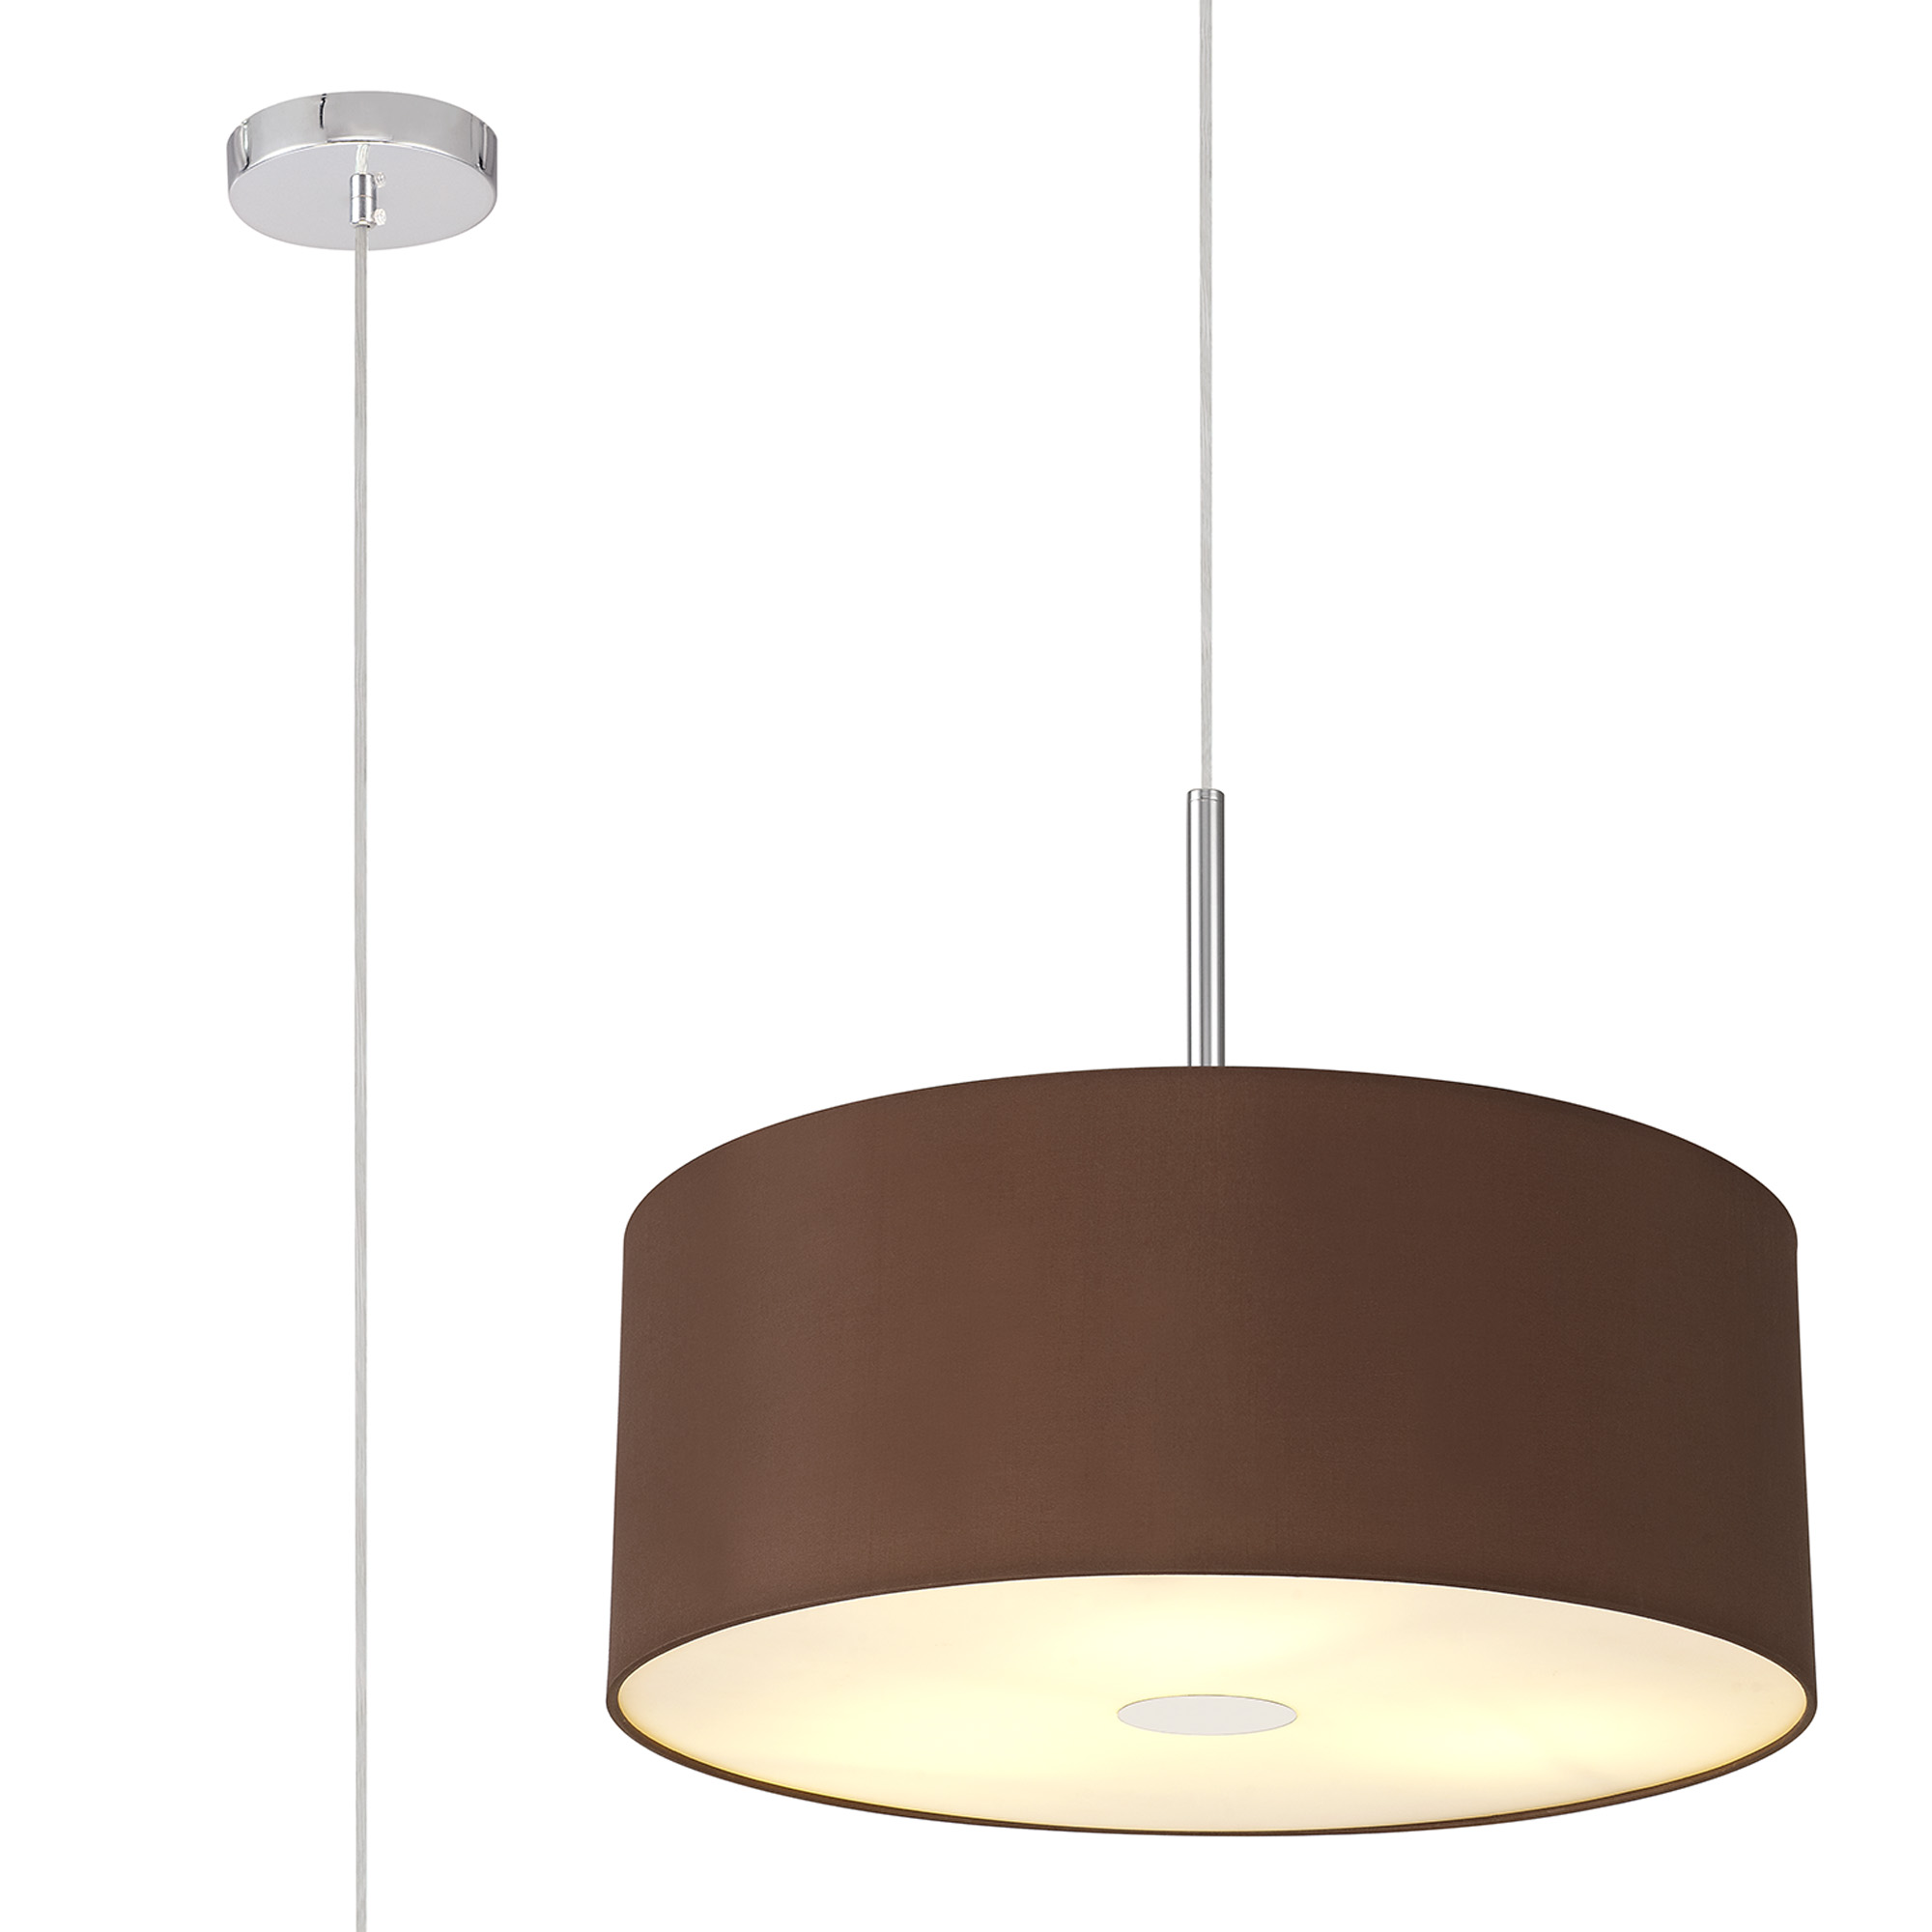 DK0346  Baymont 50cm 3 Light Pendant Polished Chrome, Raw Cocoa/Grecian Bronze, Frosted Diffuser